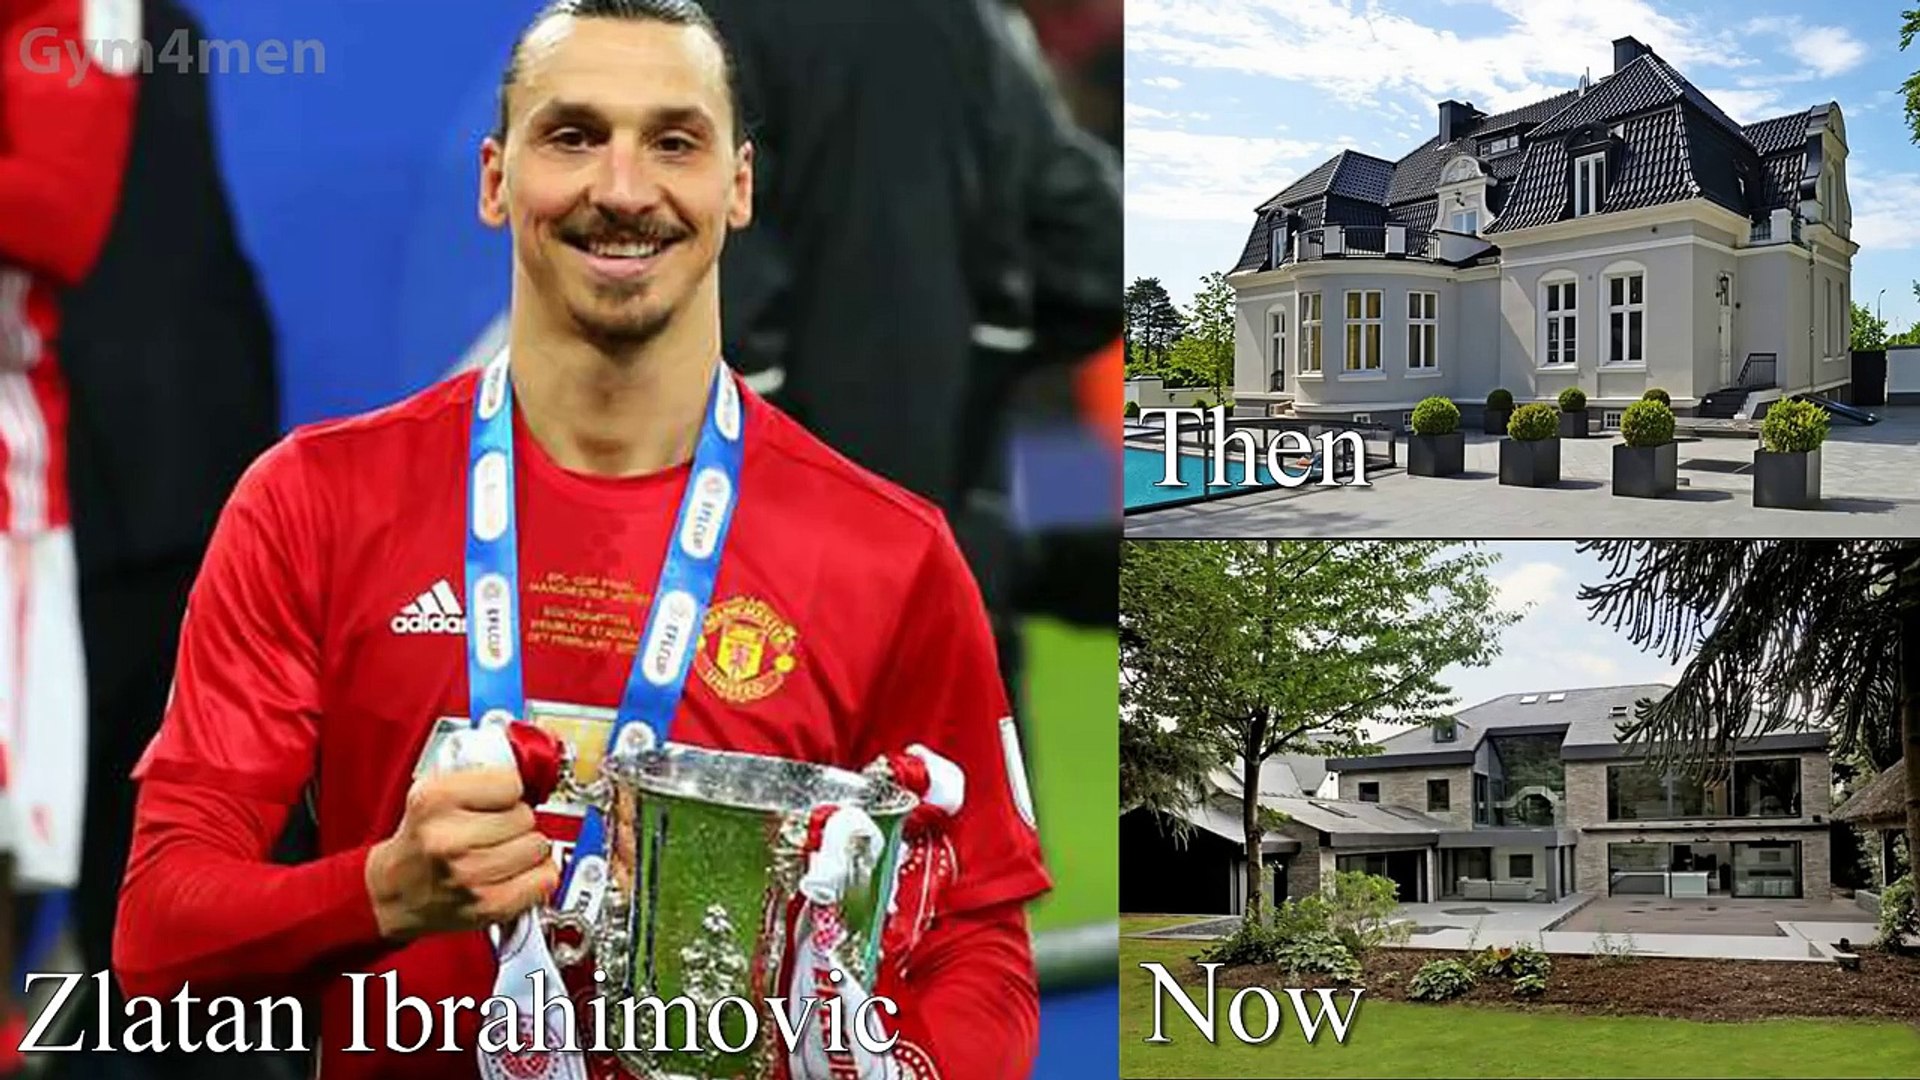 10 Footballers Houses Then And Now Ronaldo Neymar Messi Etc Hd Video Dailymotion